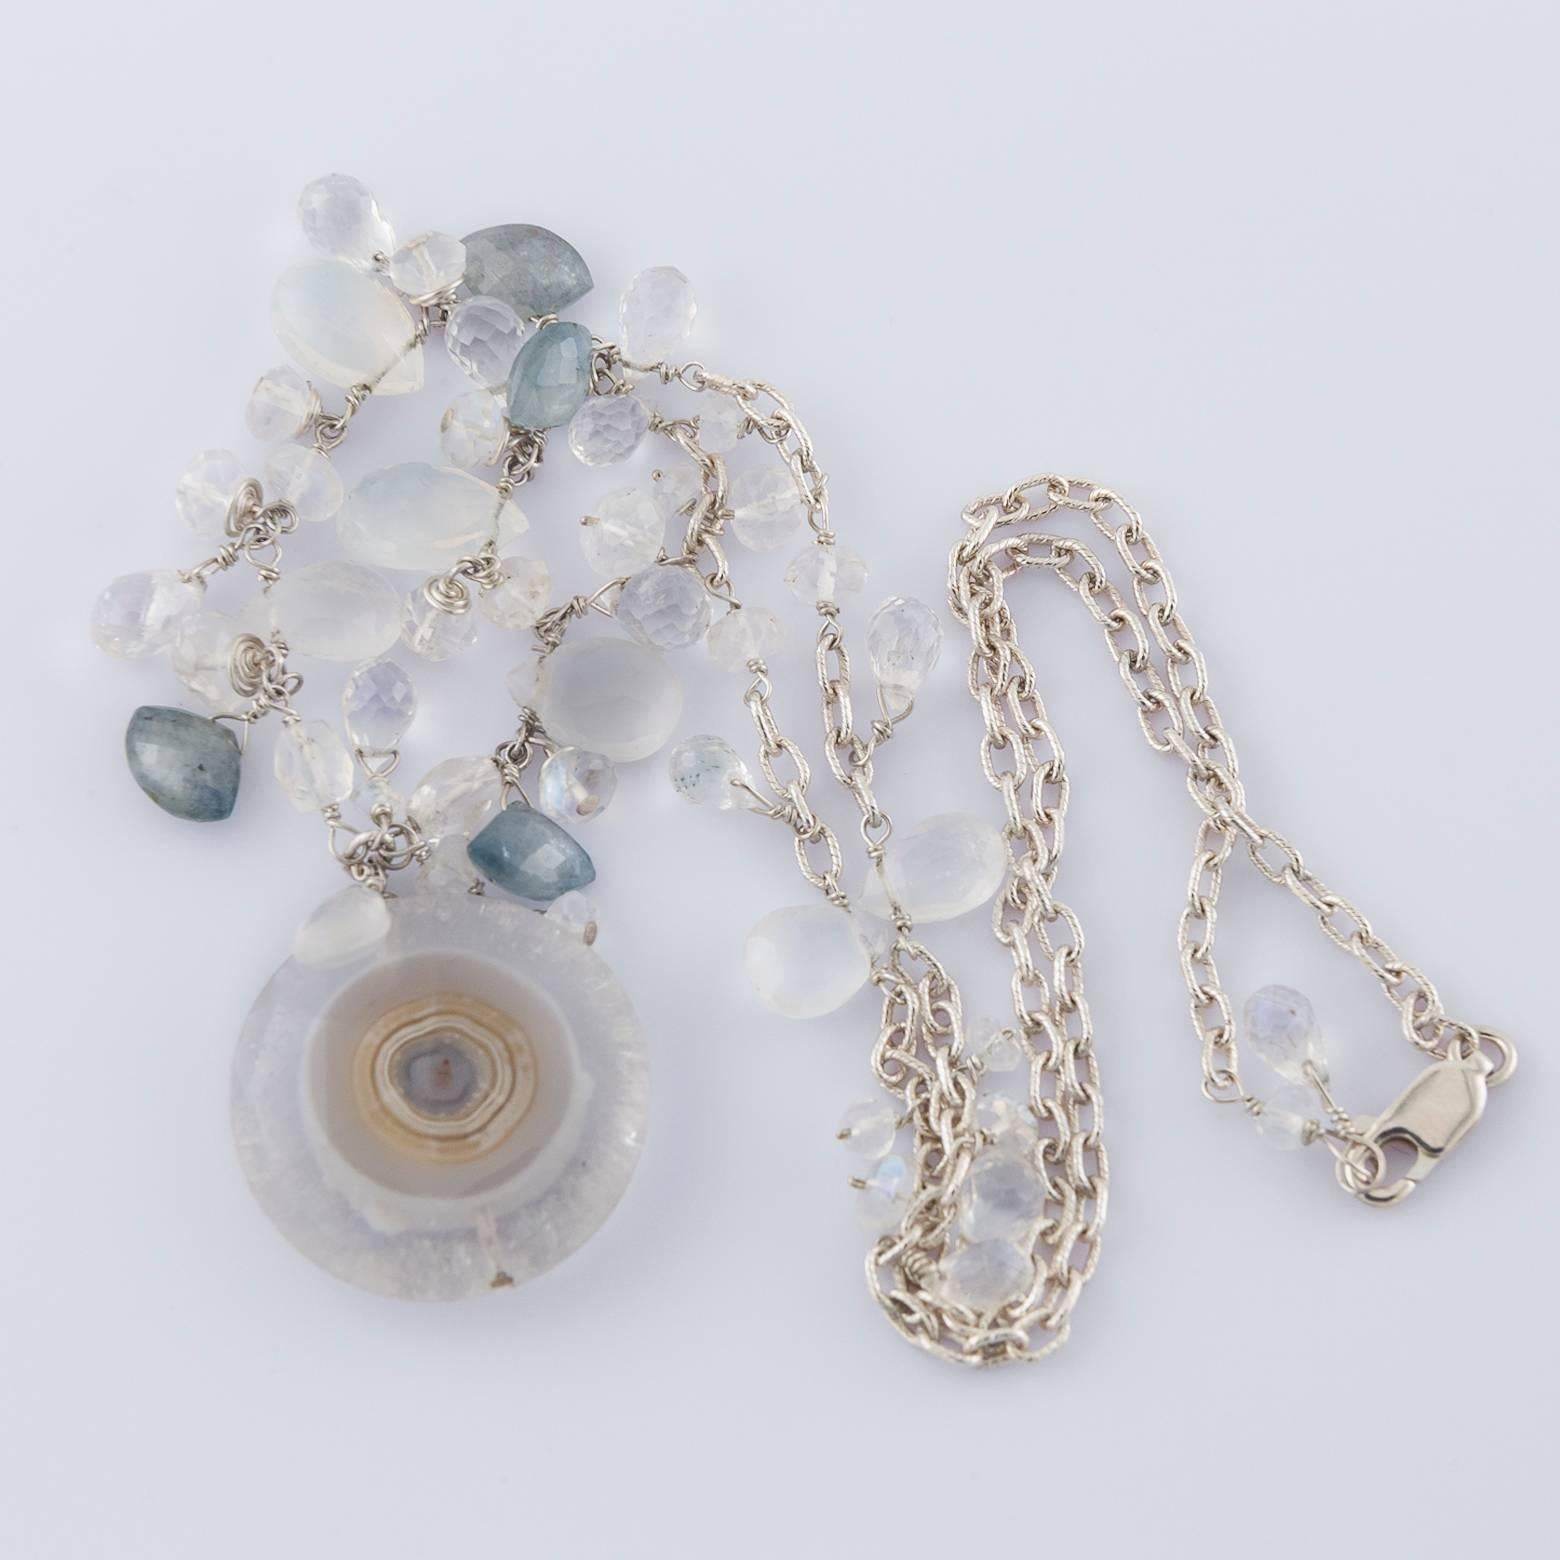 Moonstone, Labradorite and a slice of a stalactite embellish this gorgeous necklace with unique flare. Lightweight given it's 7/8 in. diameter, it's elegant and earthy and on Sterling Silver. The light blues and whites of the moonstone glam it up